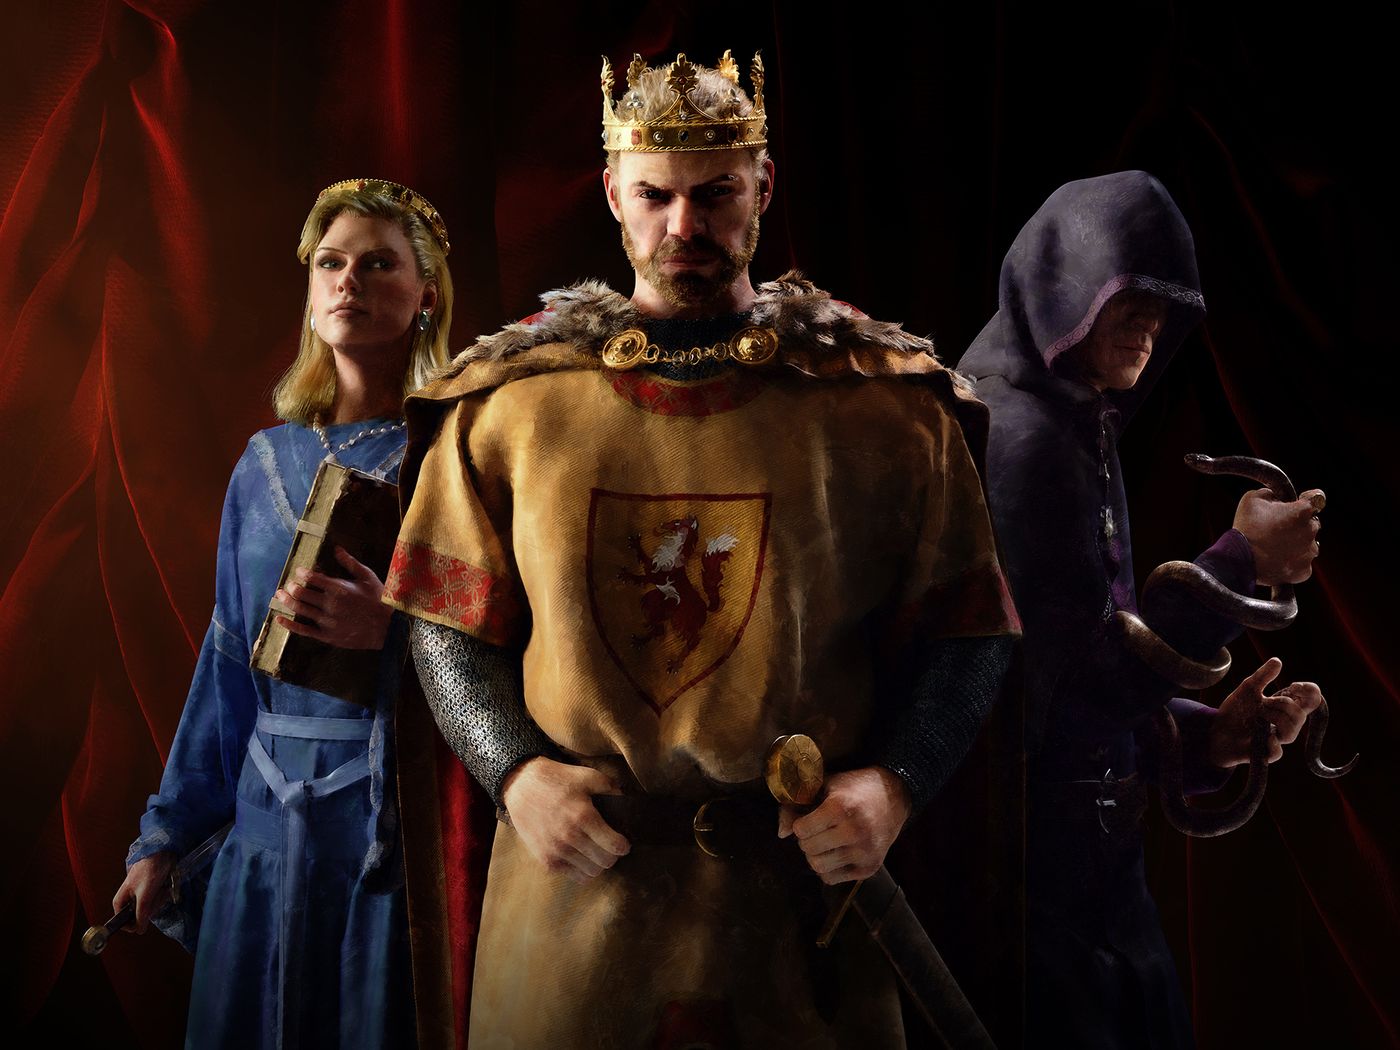 Image for Crusader Kings 3 has sold 1 million copies on Steam